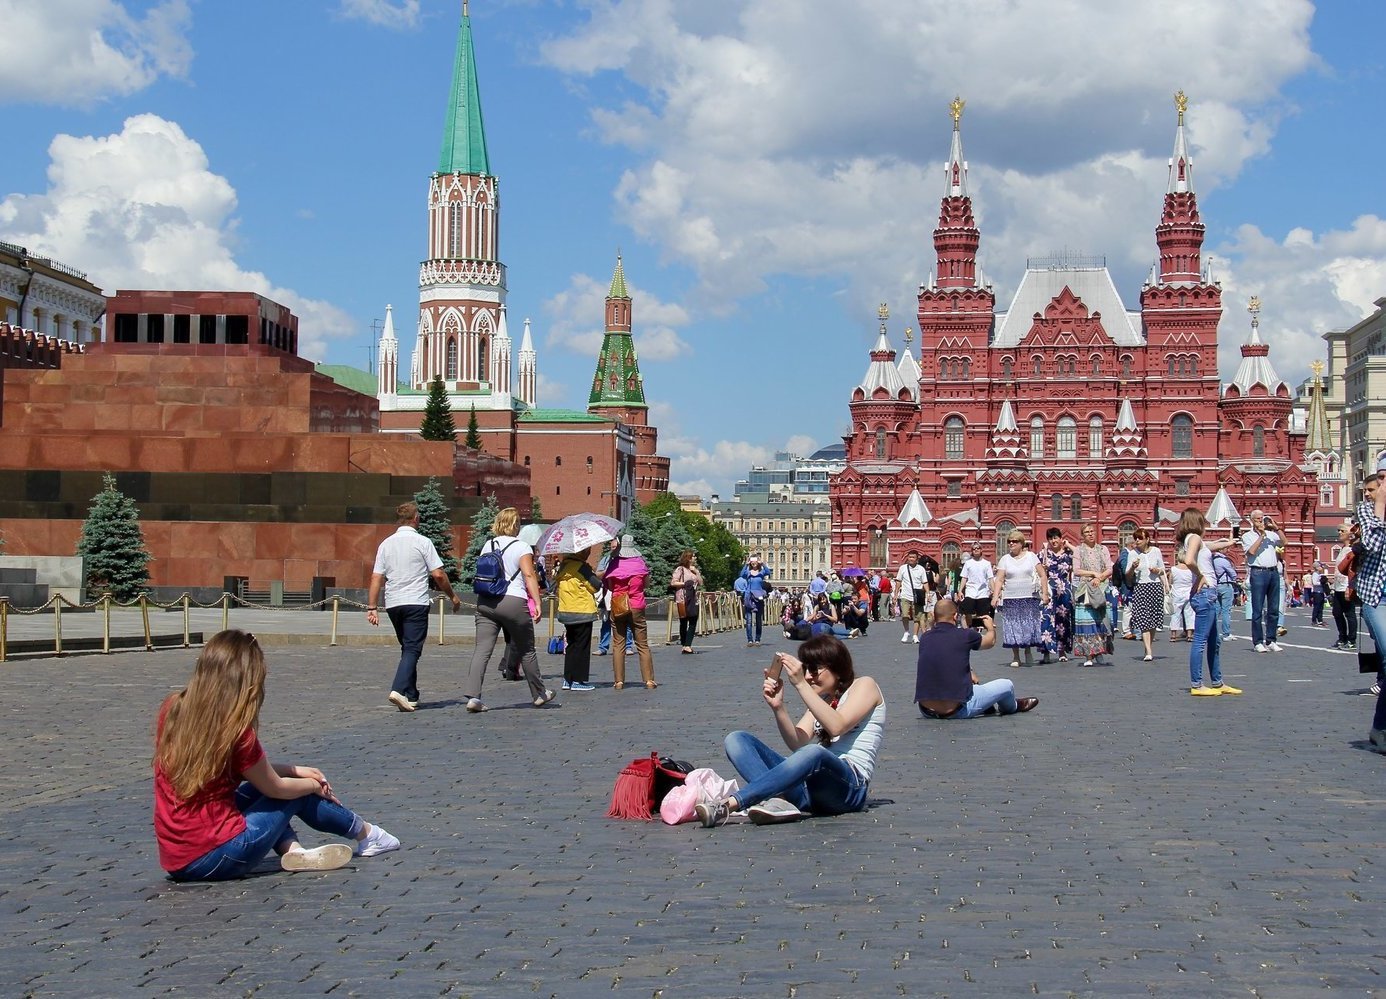 Why the red square is red?